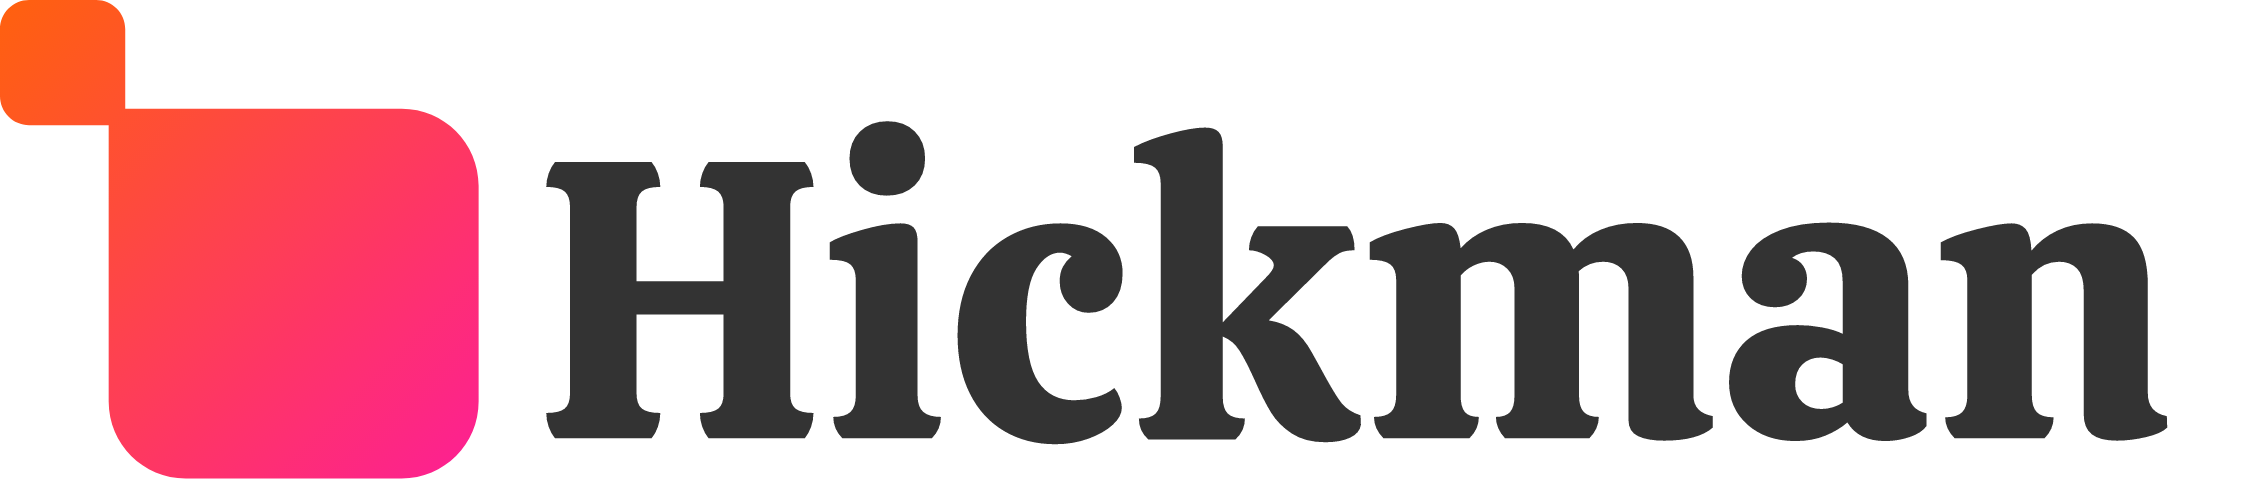 Hickman.io Coupons and Promo Code